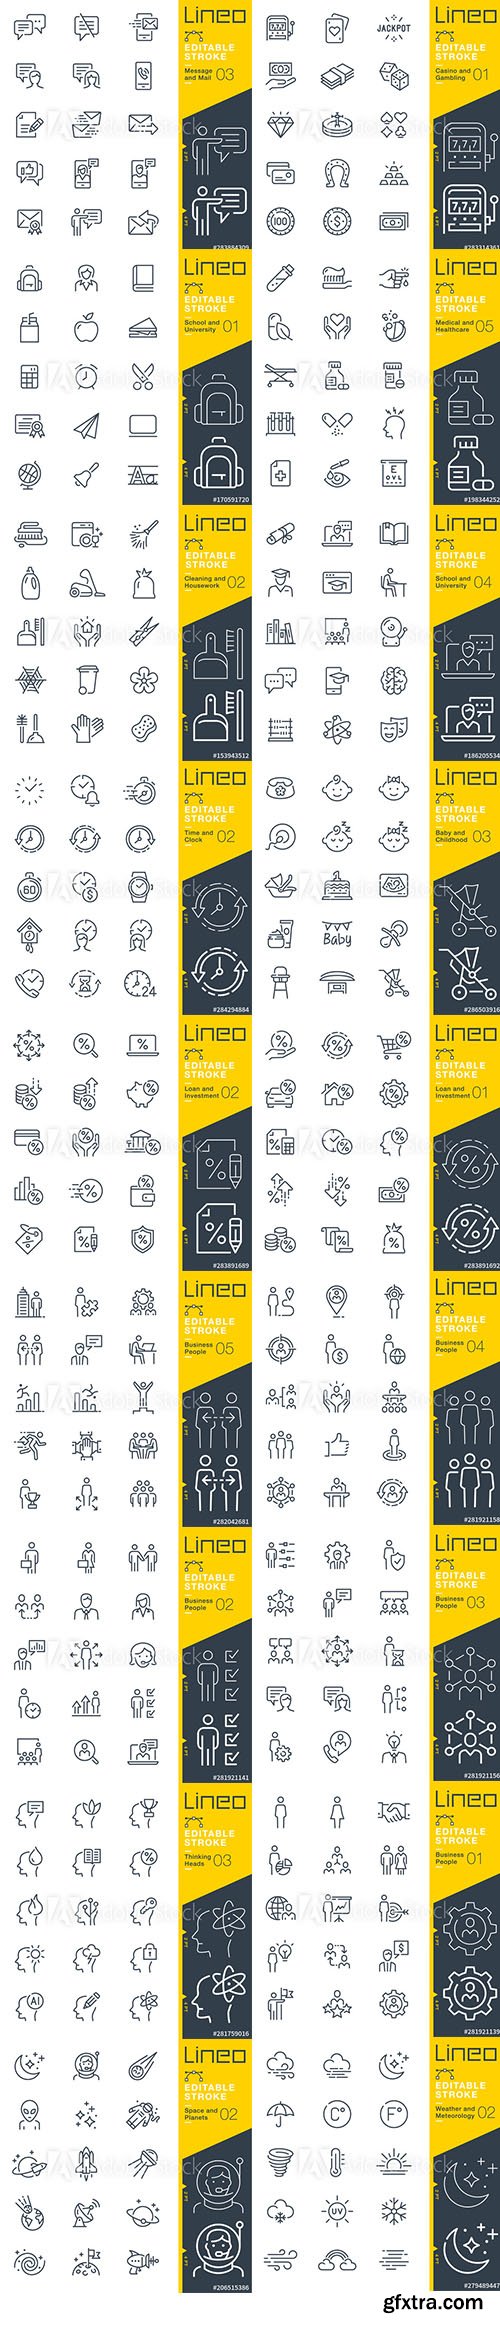 Vector Set - Outline Icons Pack Lineo Vol 7